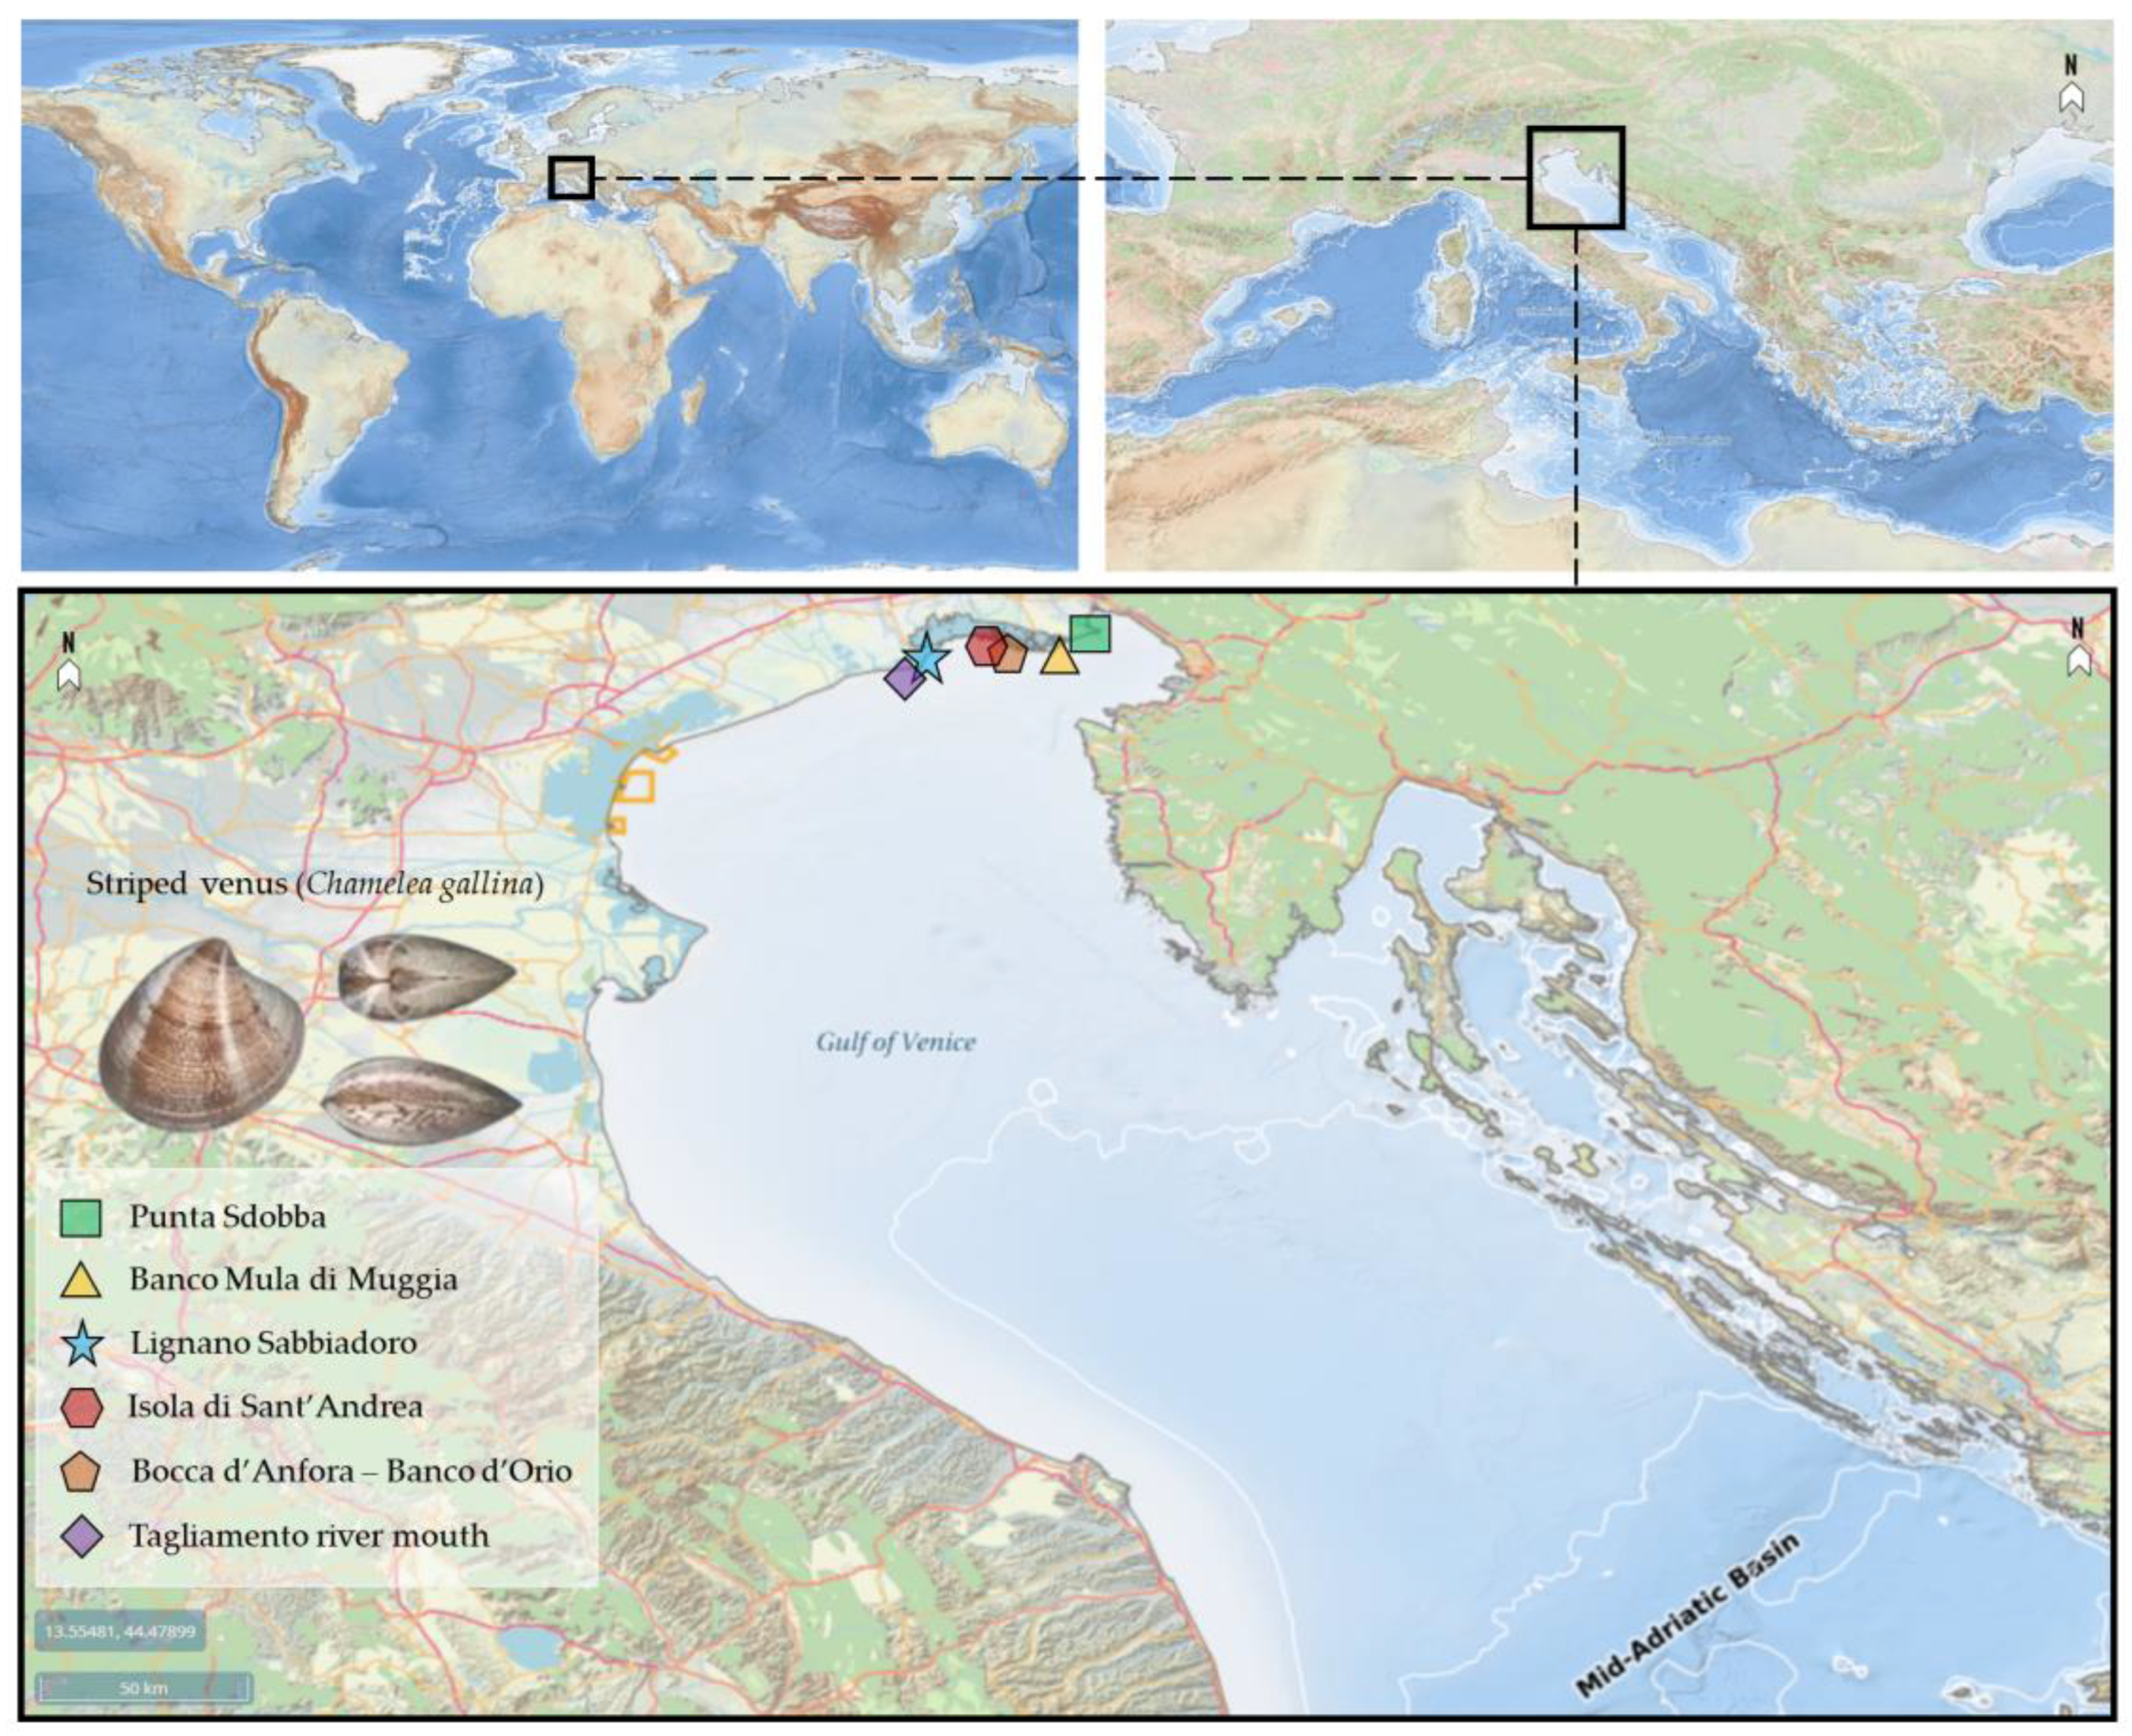 JMSE | Free Full-Text | Review of the Scientific Literature on Biology,  Ecology, and Aspects Related to the Fishing Sector of the Striped Venus  (Chamelea gallina) in Northern Adriatic Sea | HTML